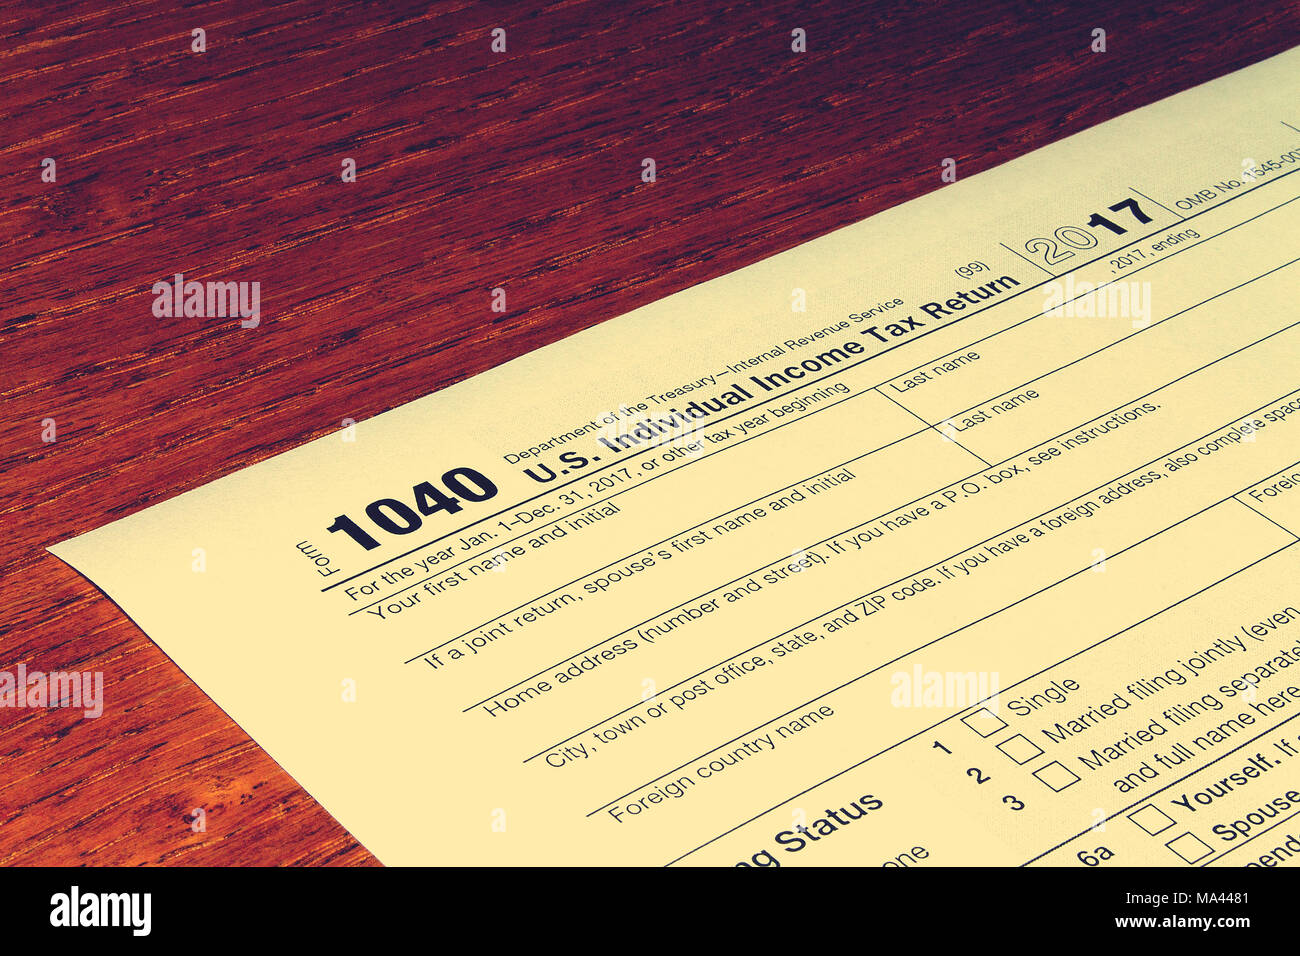 Tax day. The tax form 1040 is on a wooden table. Stock Photo